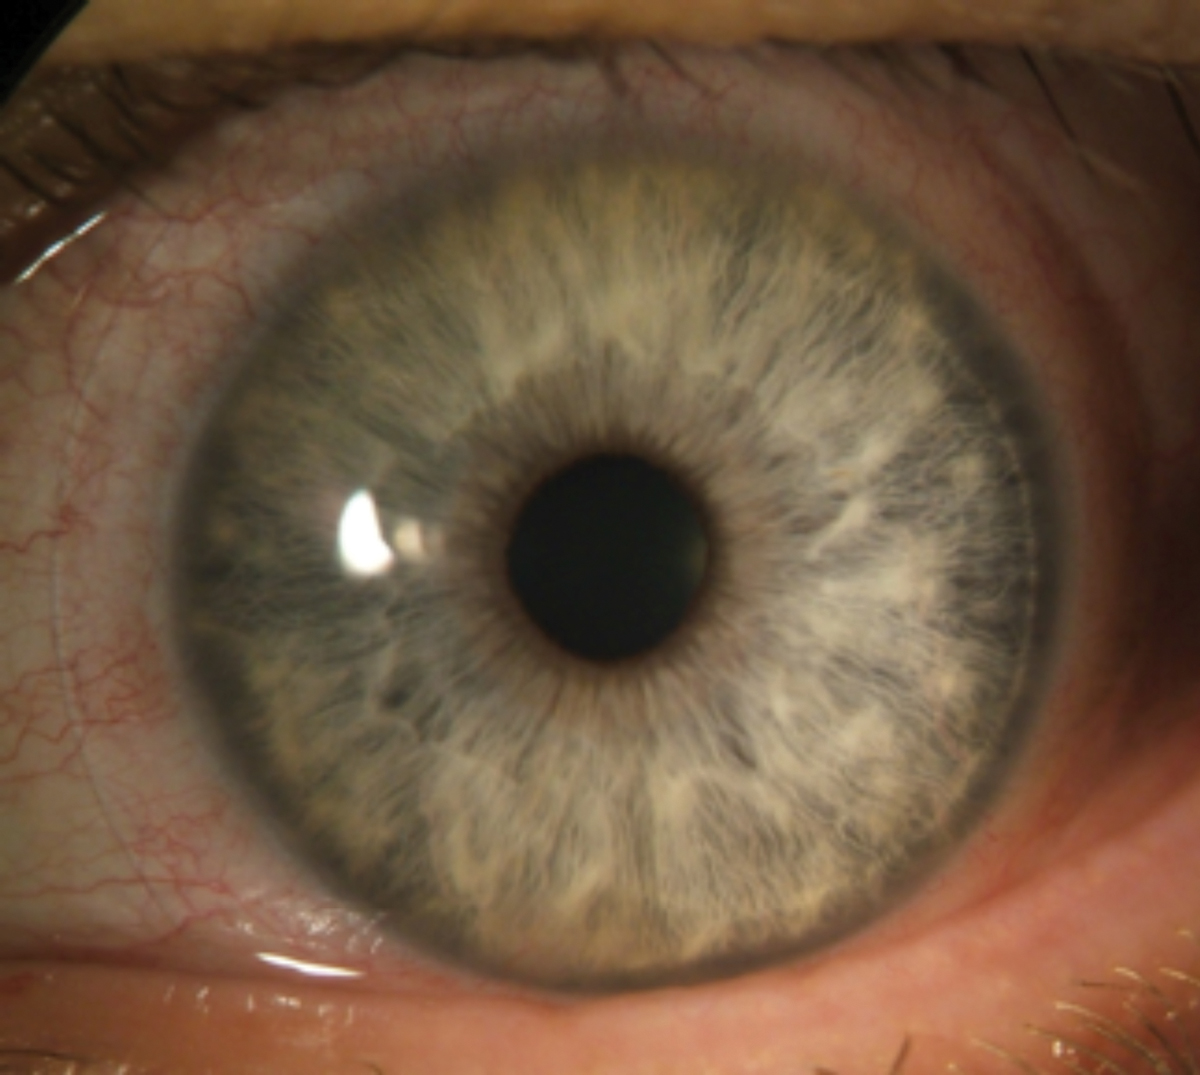 Contact lens–induced acute red eye response (CLARE) from extended wear SiHy lenses.